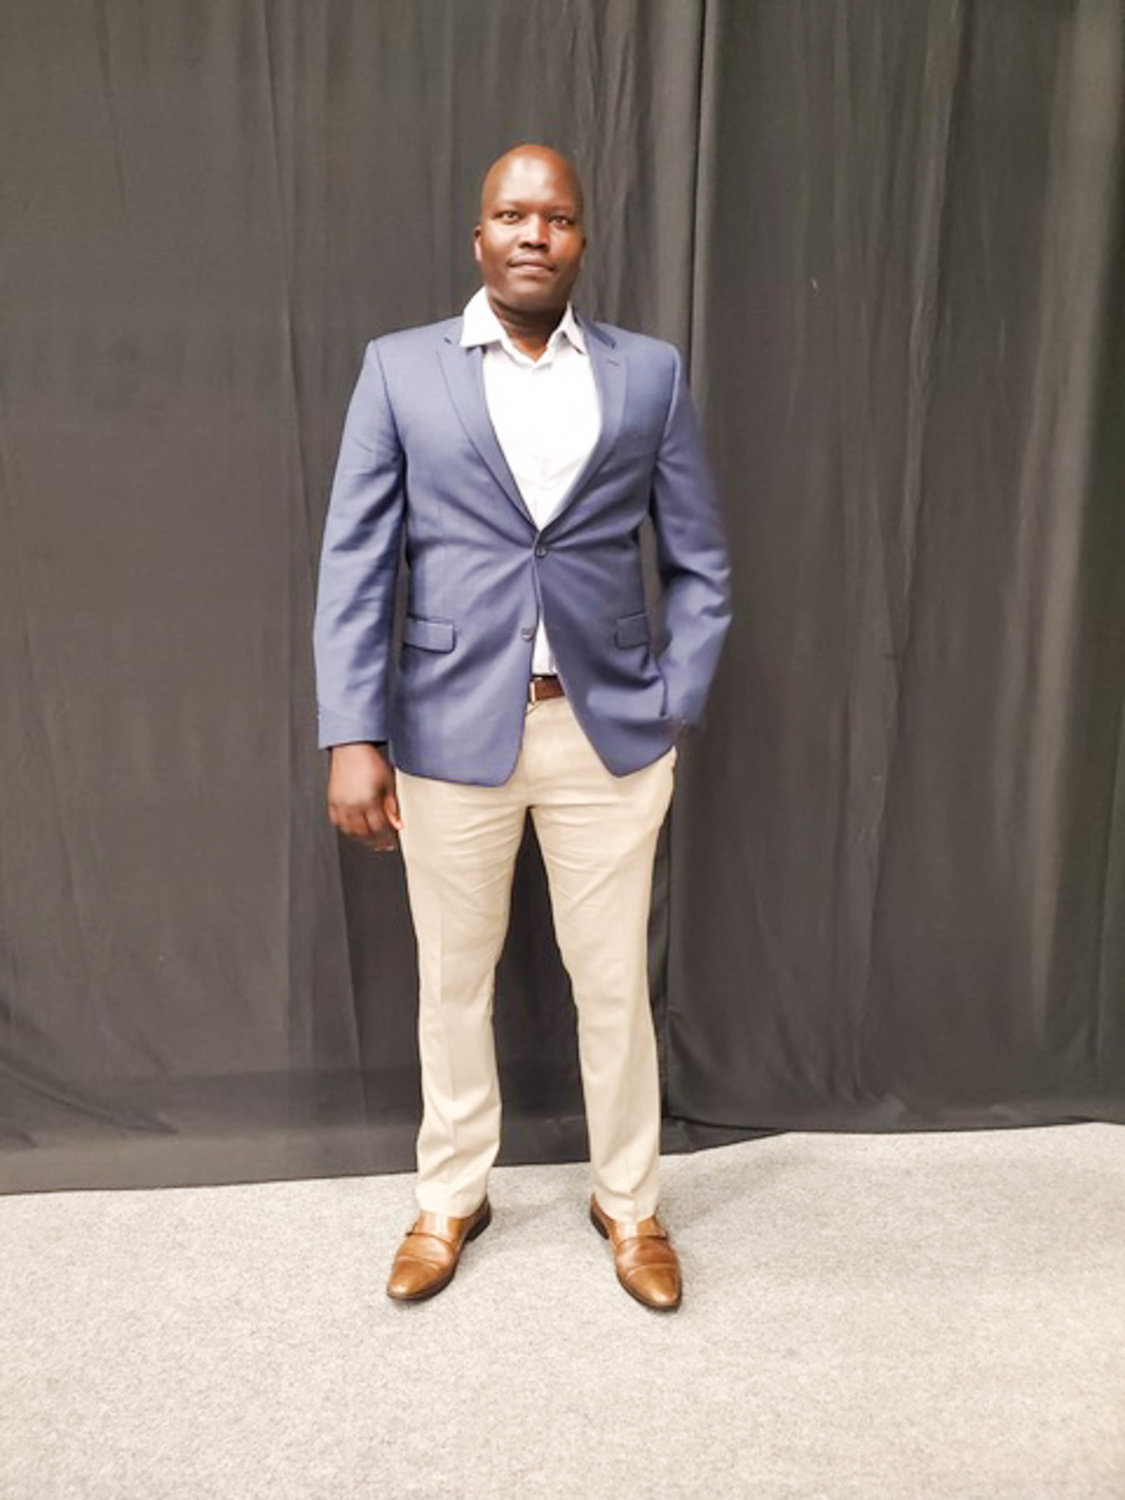 Garang Ajak, a former refugee from South Sudan and program manager at the Center for Dialogue and Action, InterFaith Works of CNY in Syracuse will be the guest speaker Oct. 29 at the YMCA of the Greater Tri-Valley’s annual Prayer Breakfast.